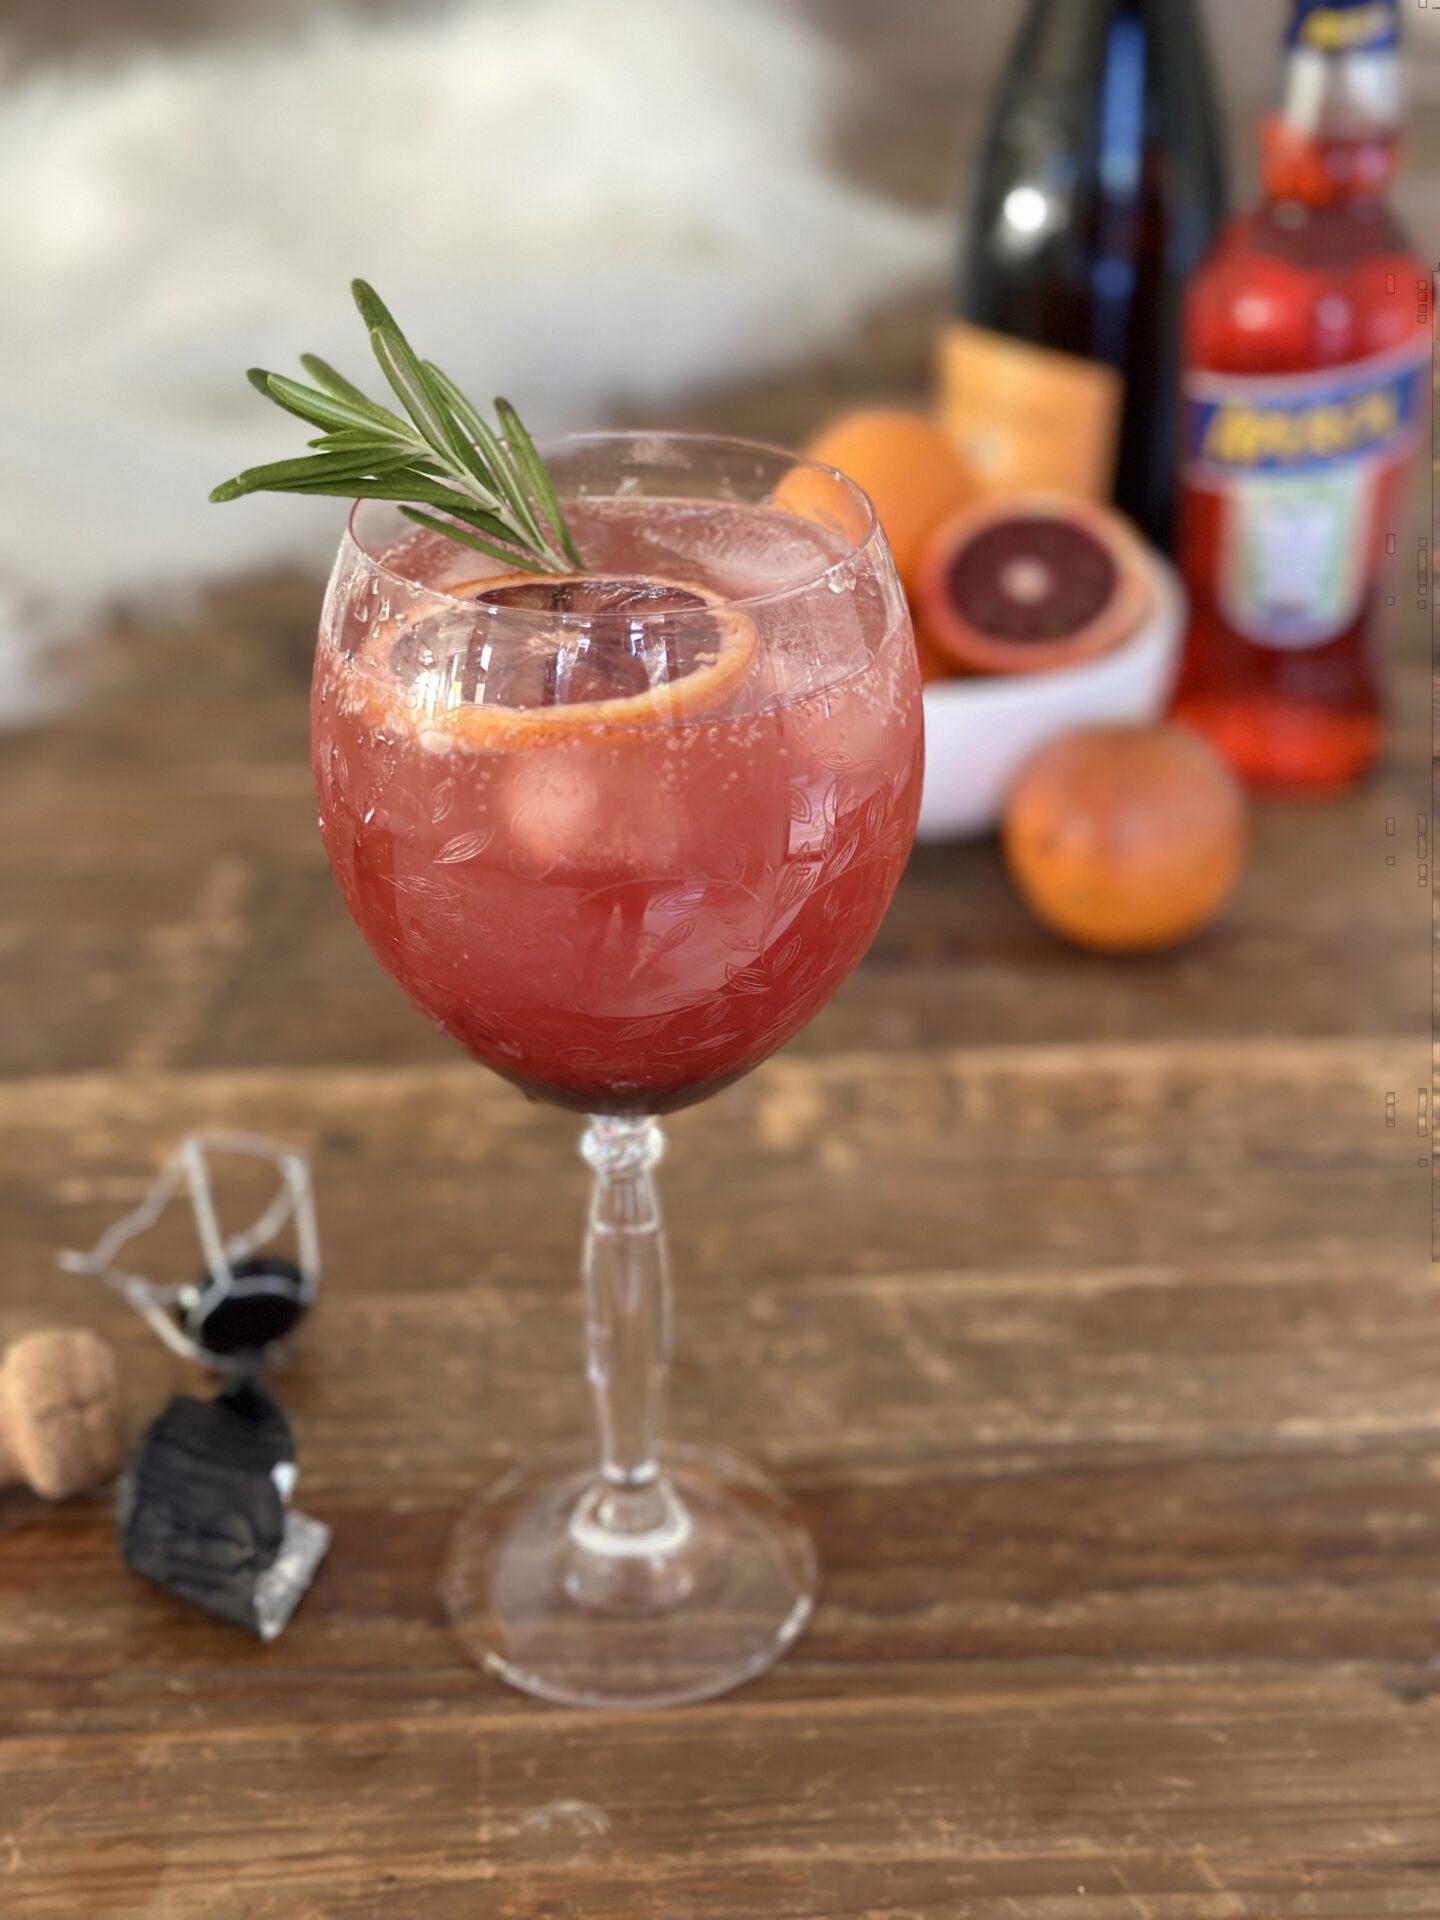 A blood orange and black currant Aperol spritz garnished with rosemary sits on a wood table